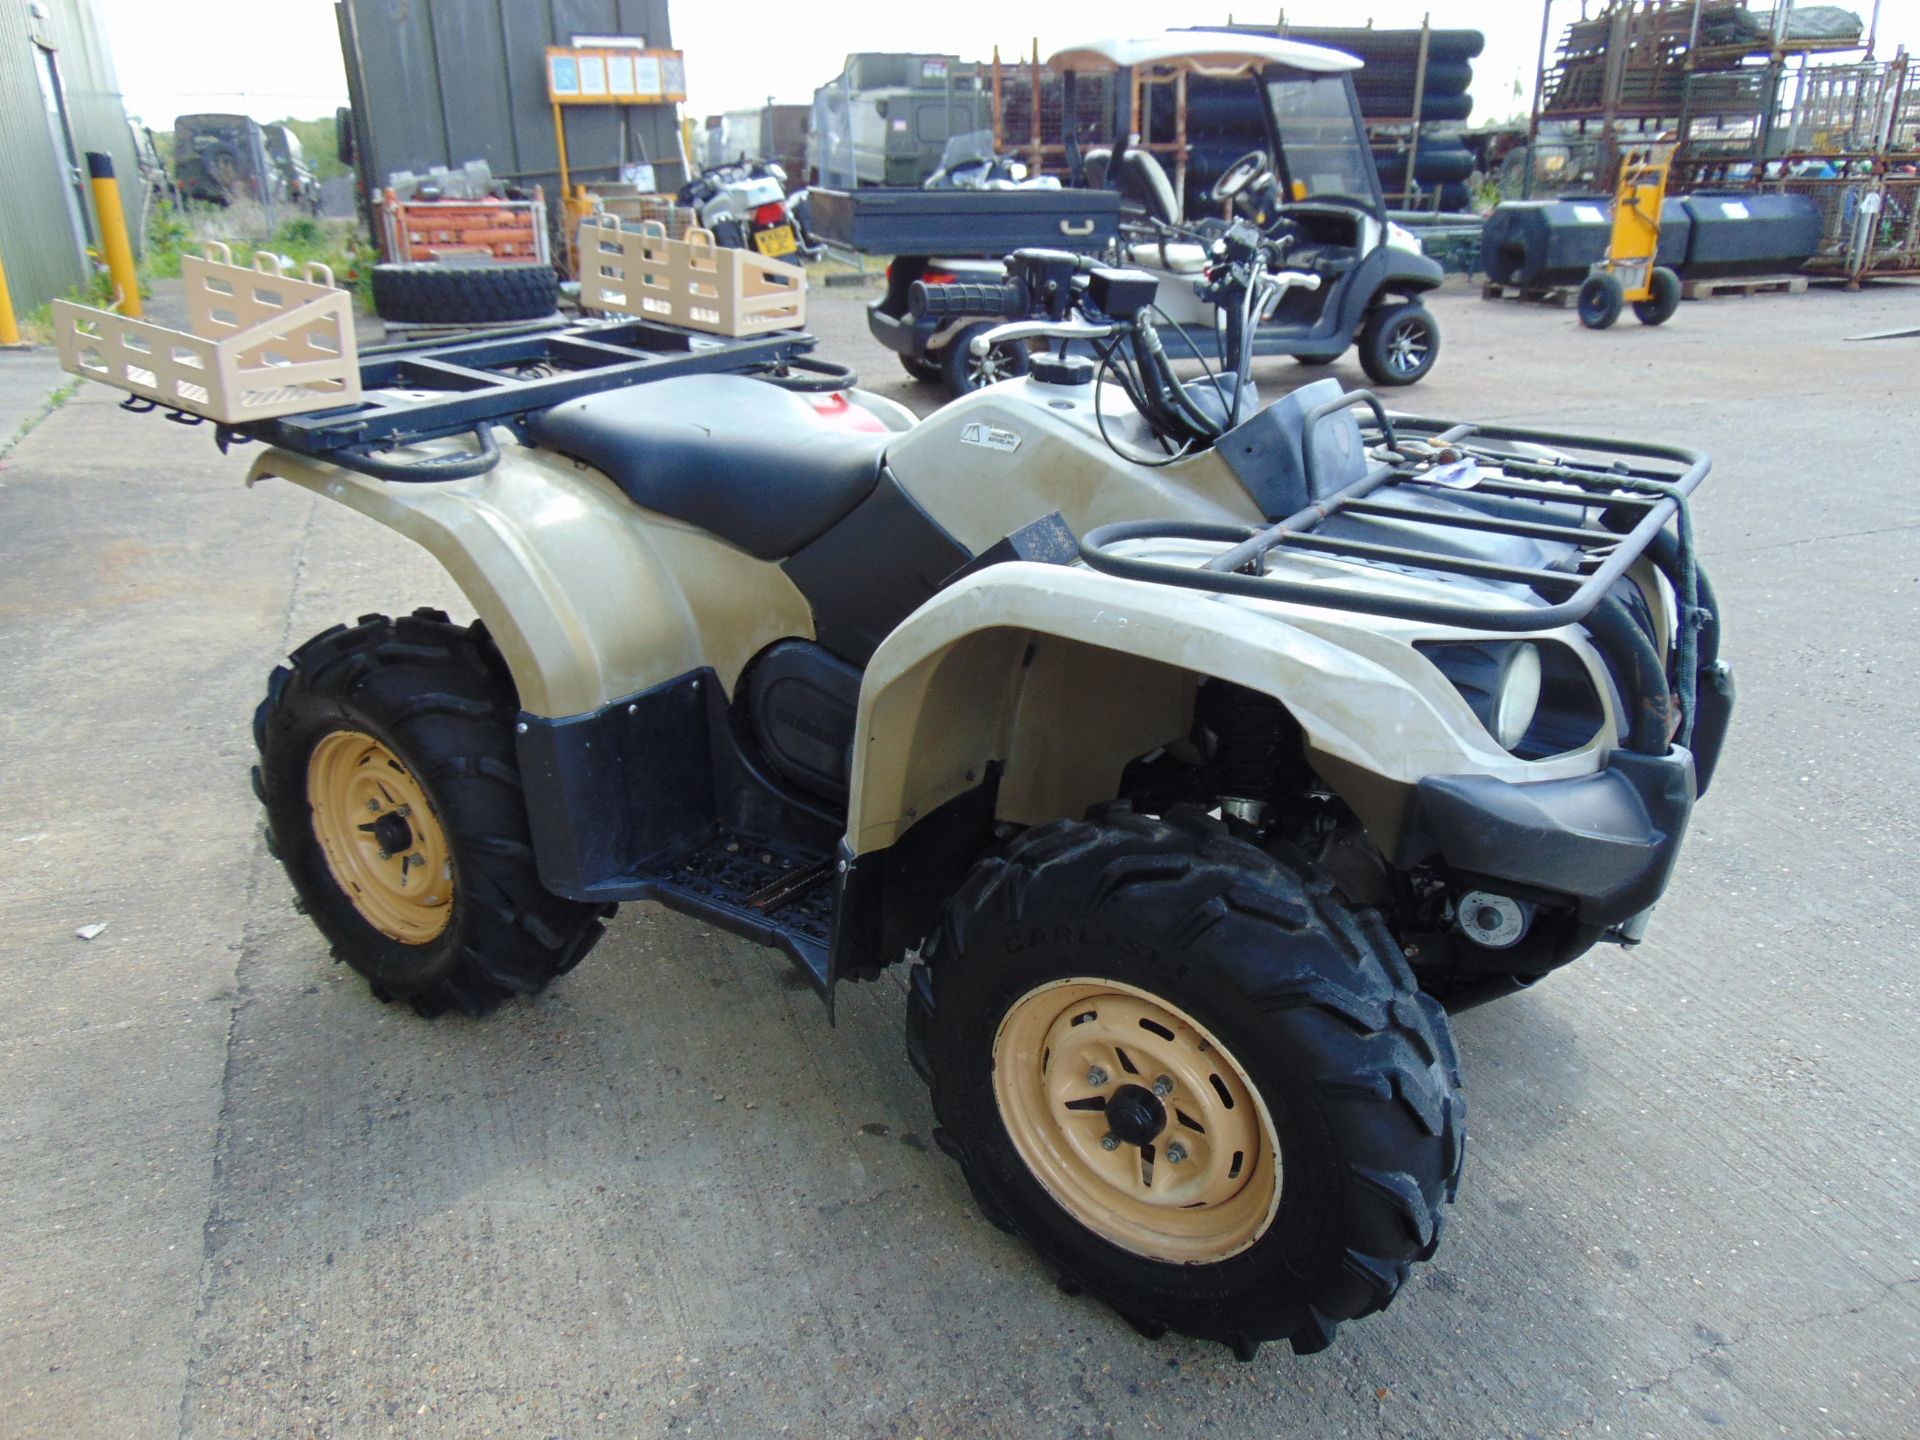 Military Specification Yamaha Grizzly 450 4 x 4 ATV Quad Bike Showing 223 hrs - Image 5 of 23